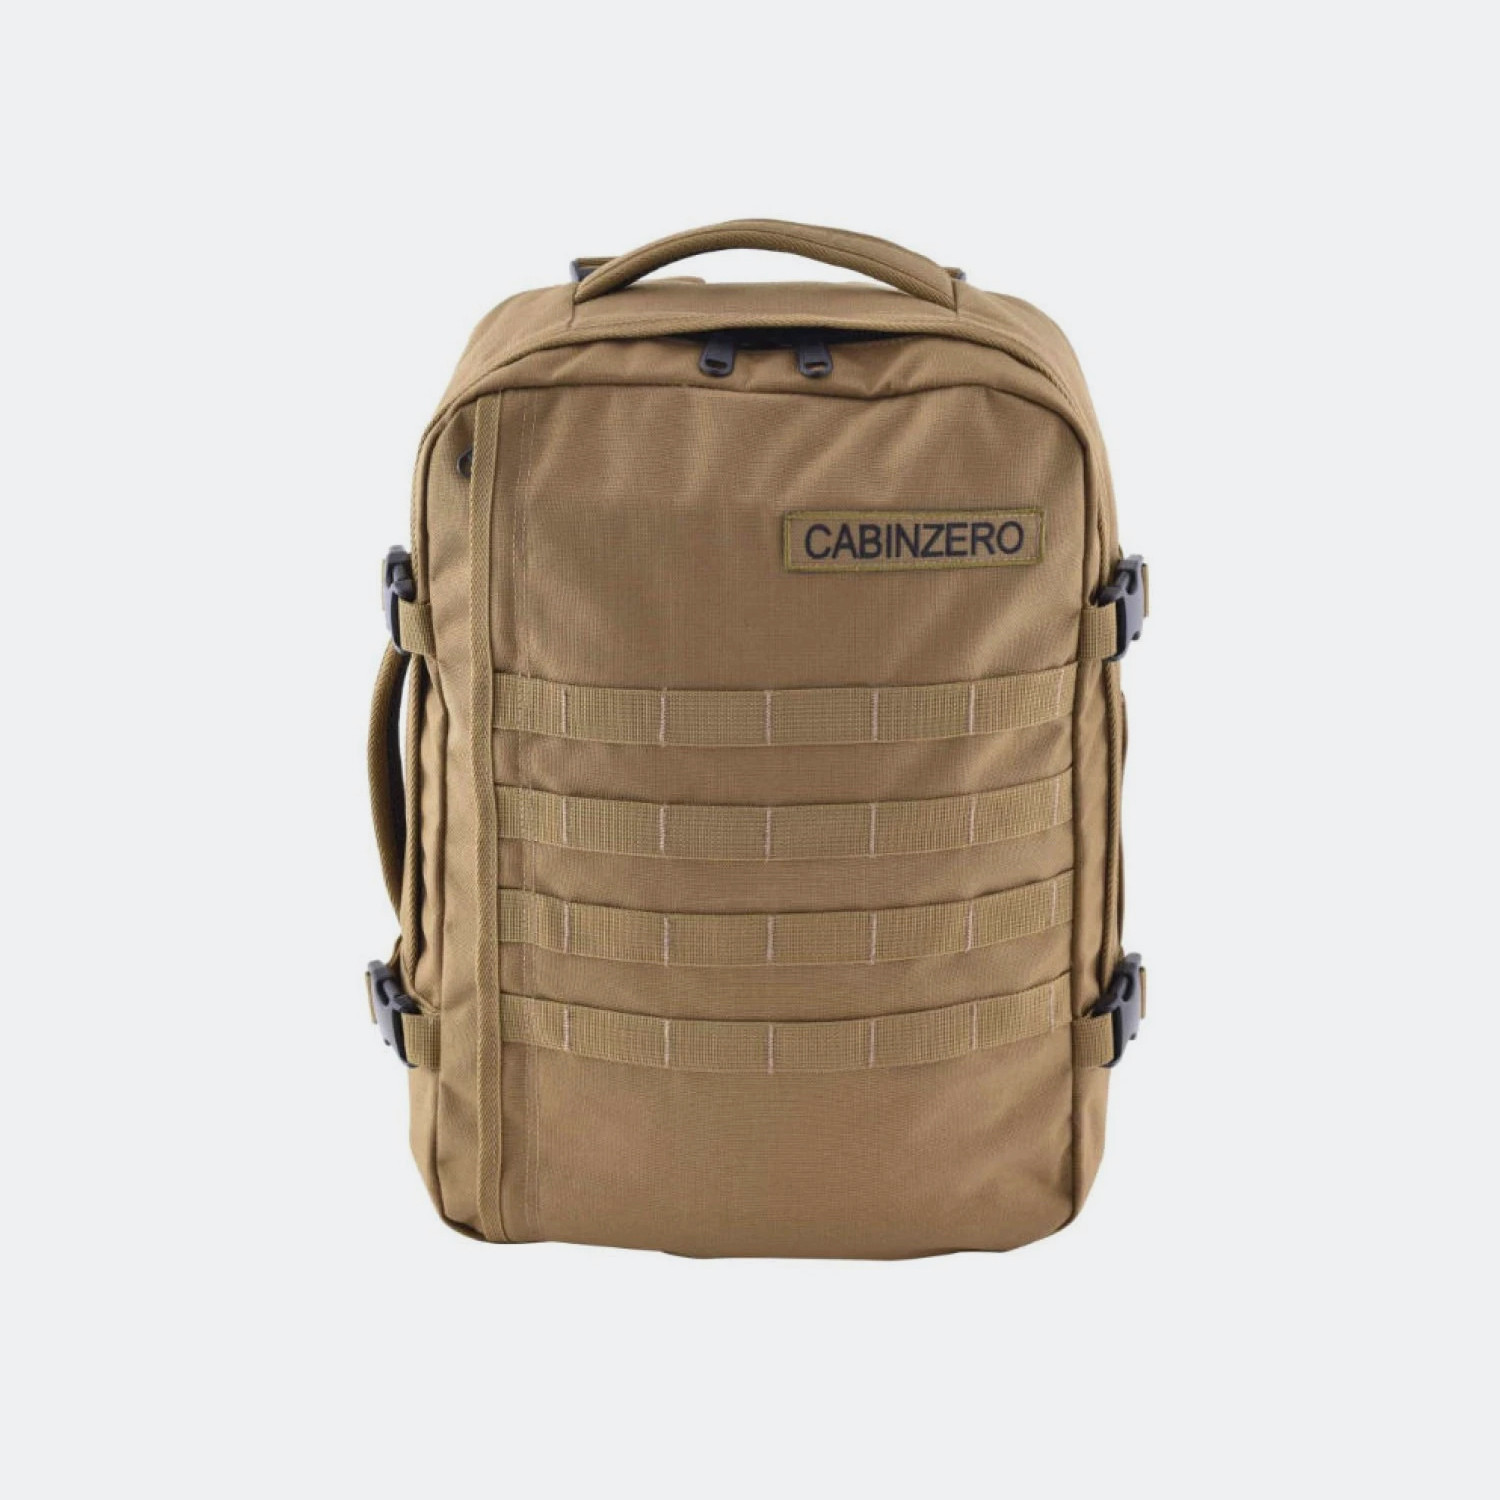 Cabin Zero Absolute Military Σακίδιο Πλάτης 28L (9000089755_1628)